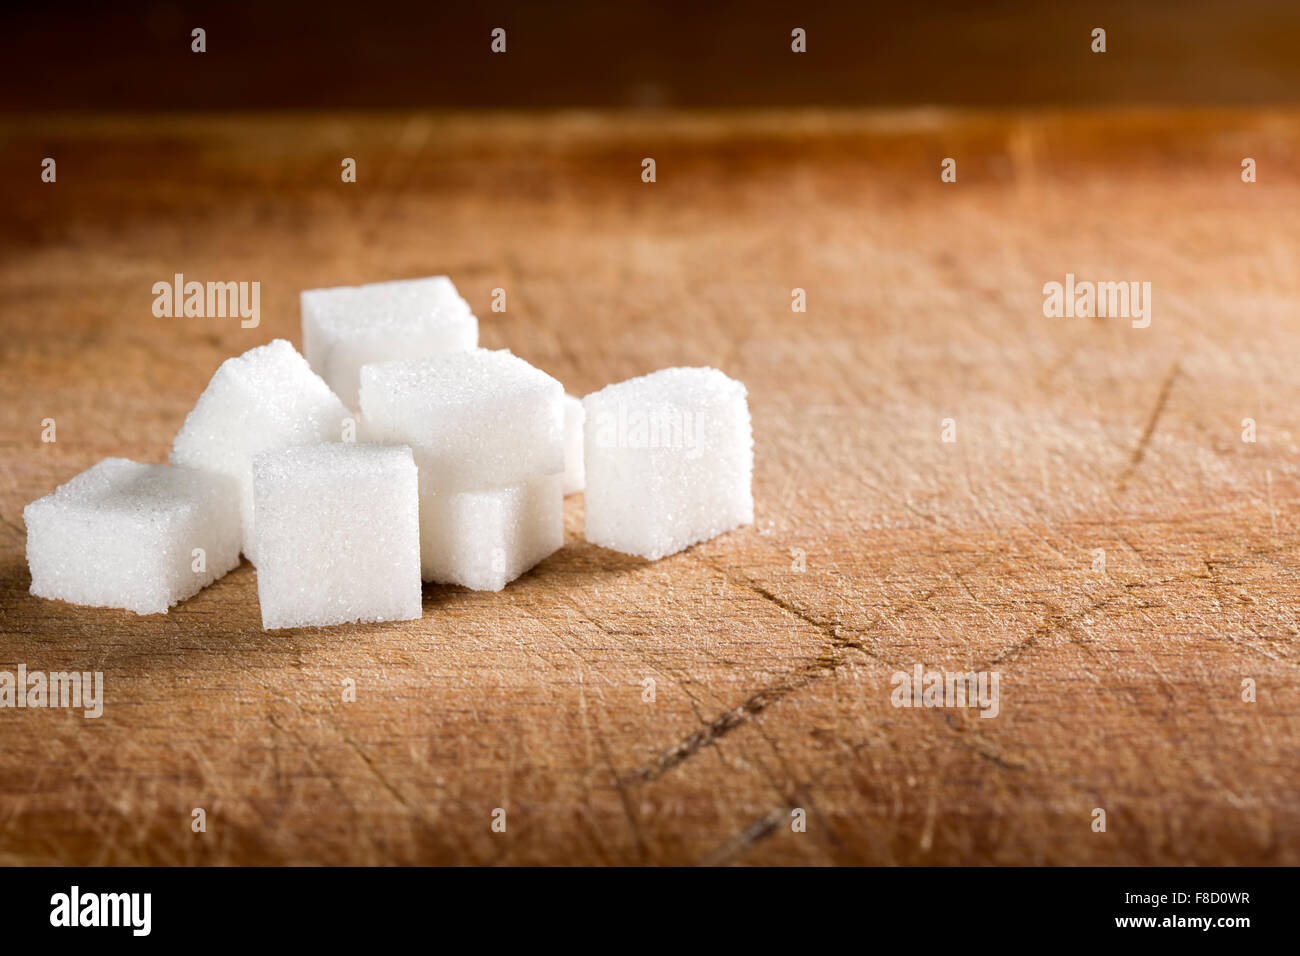 White sugar cubes on old wooden table Stock Photo